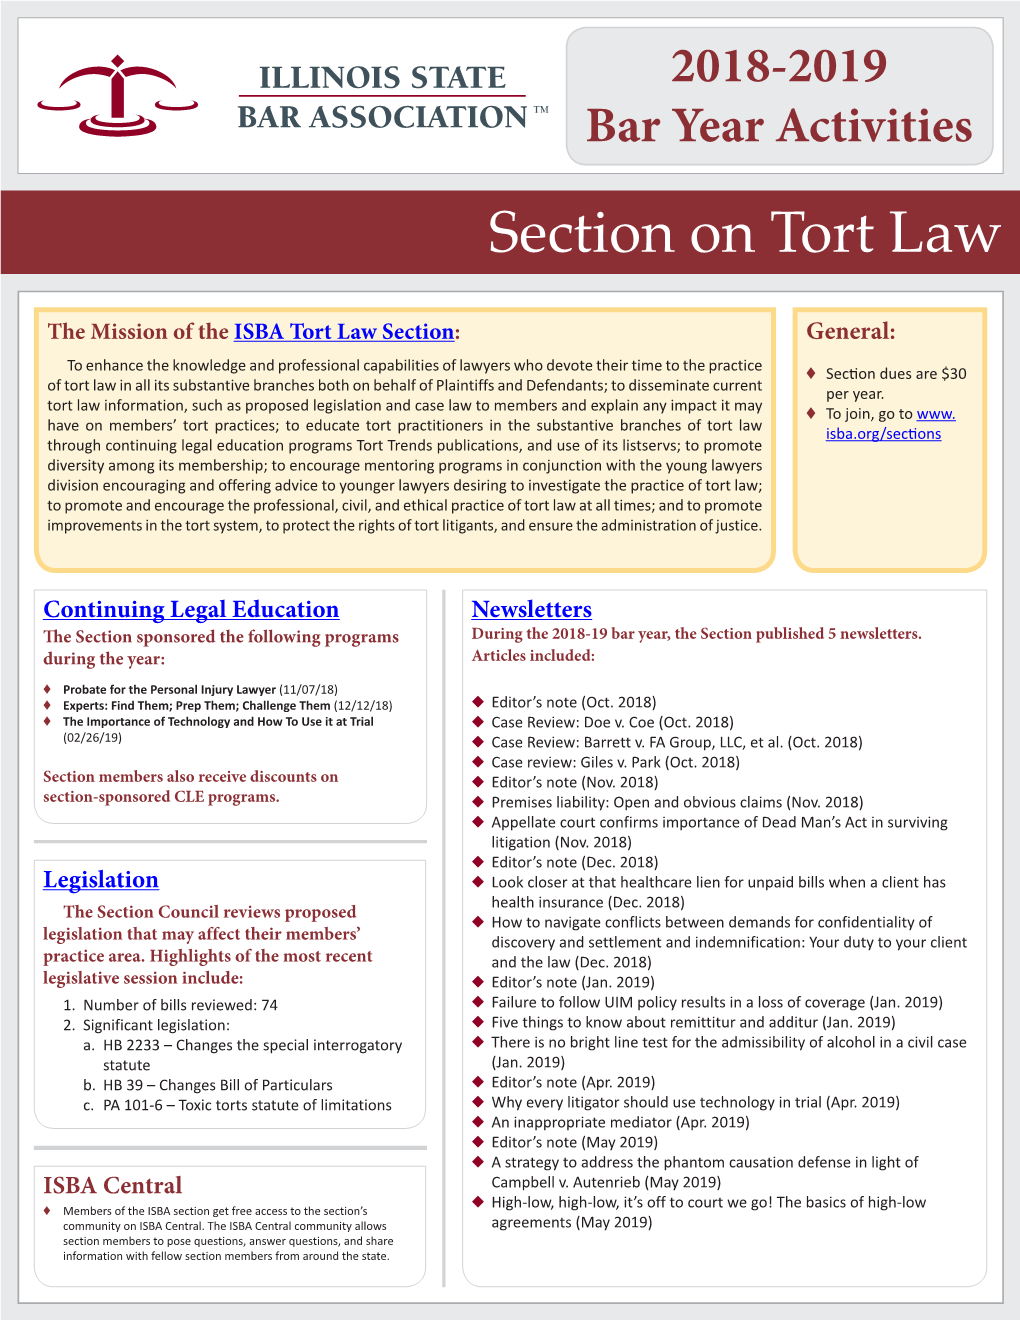 Section on Tort Law